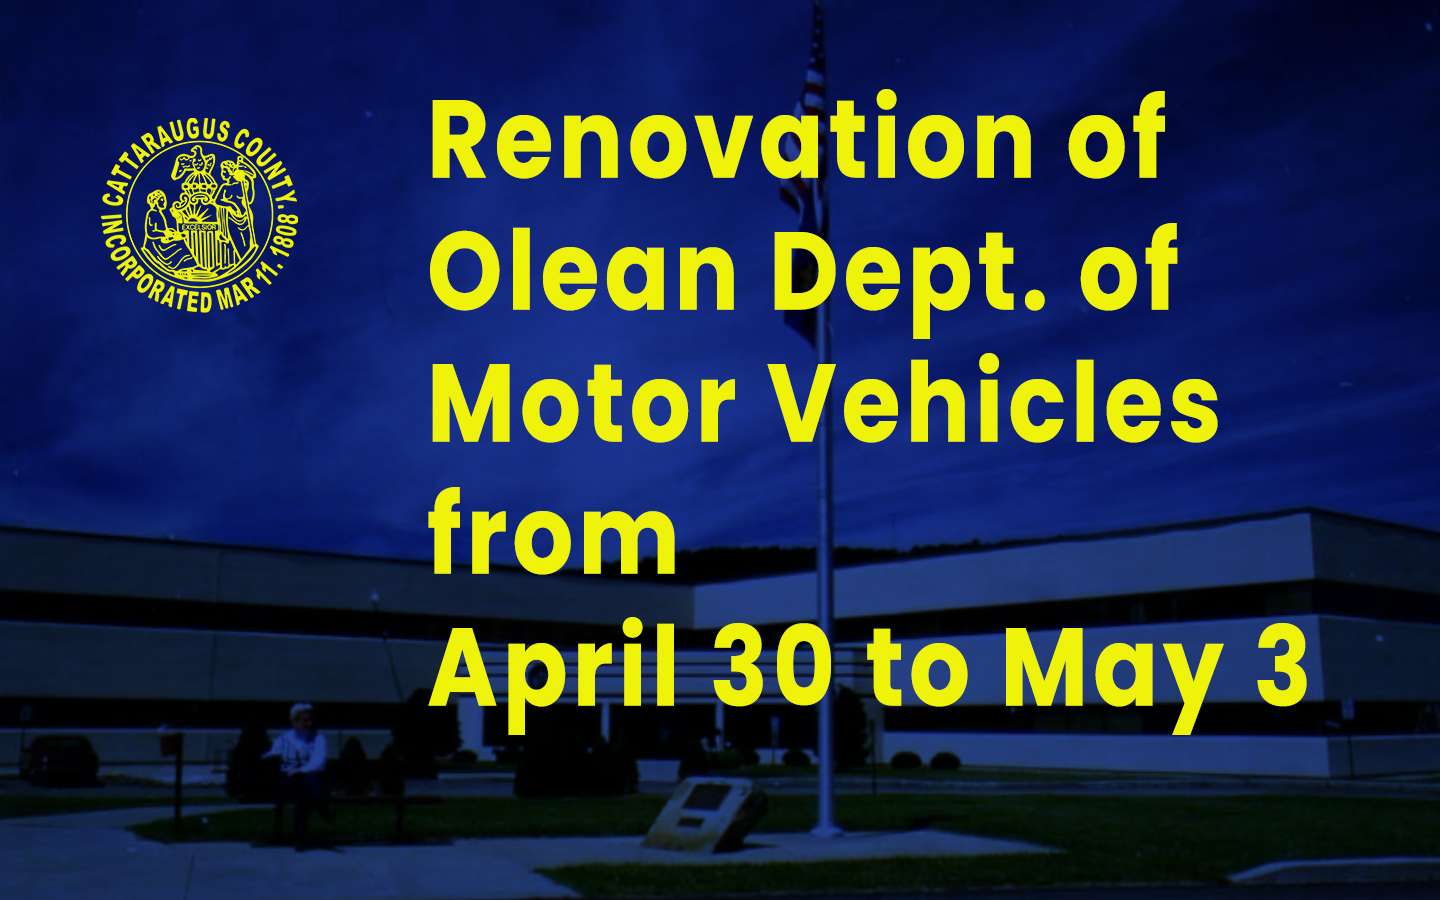 Renovation of Olean Dept. of Motor Vehicles from April 30 to May 3